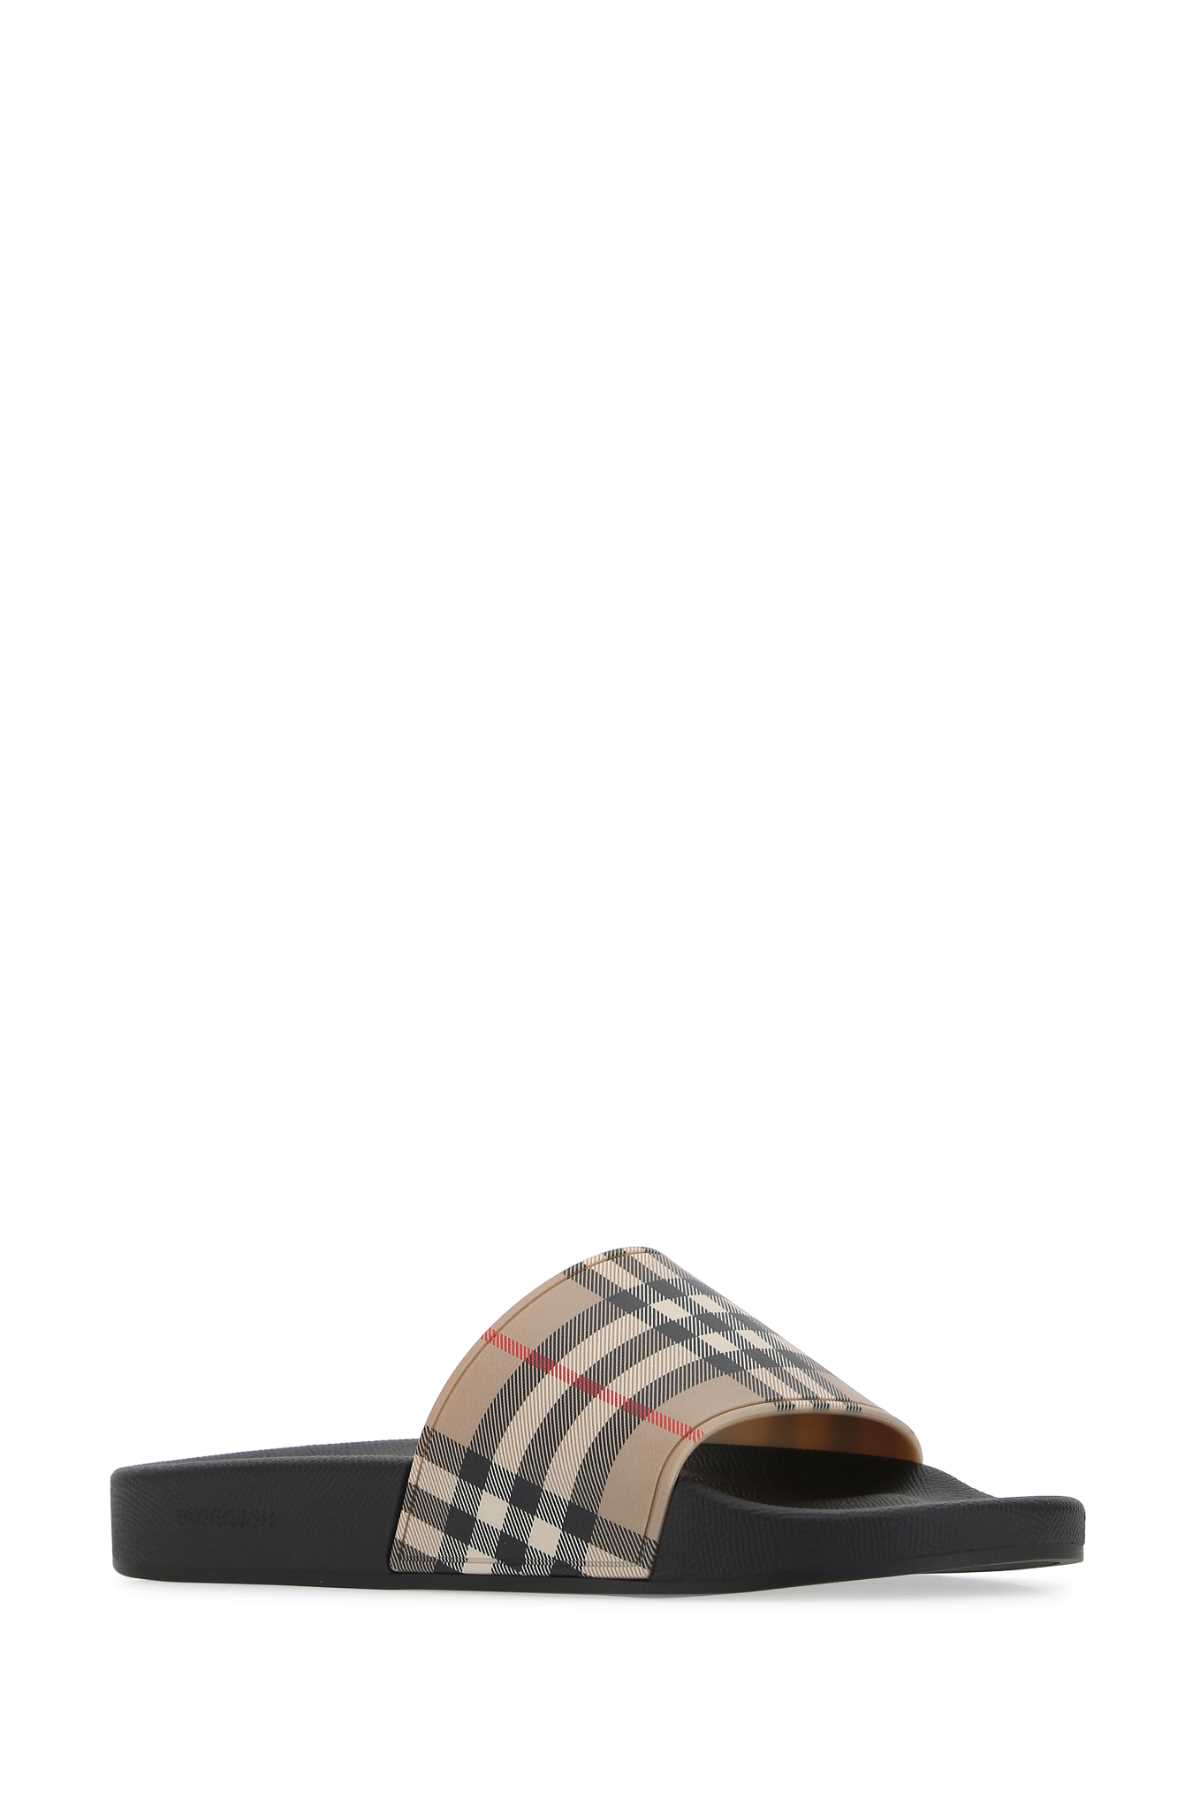 BURBERRY PRINTED RUBBER SLIPPERS